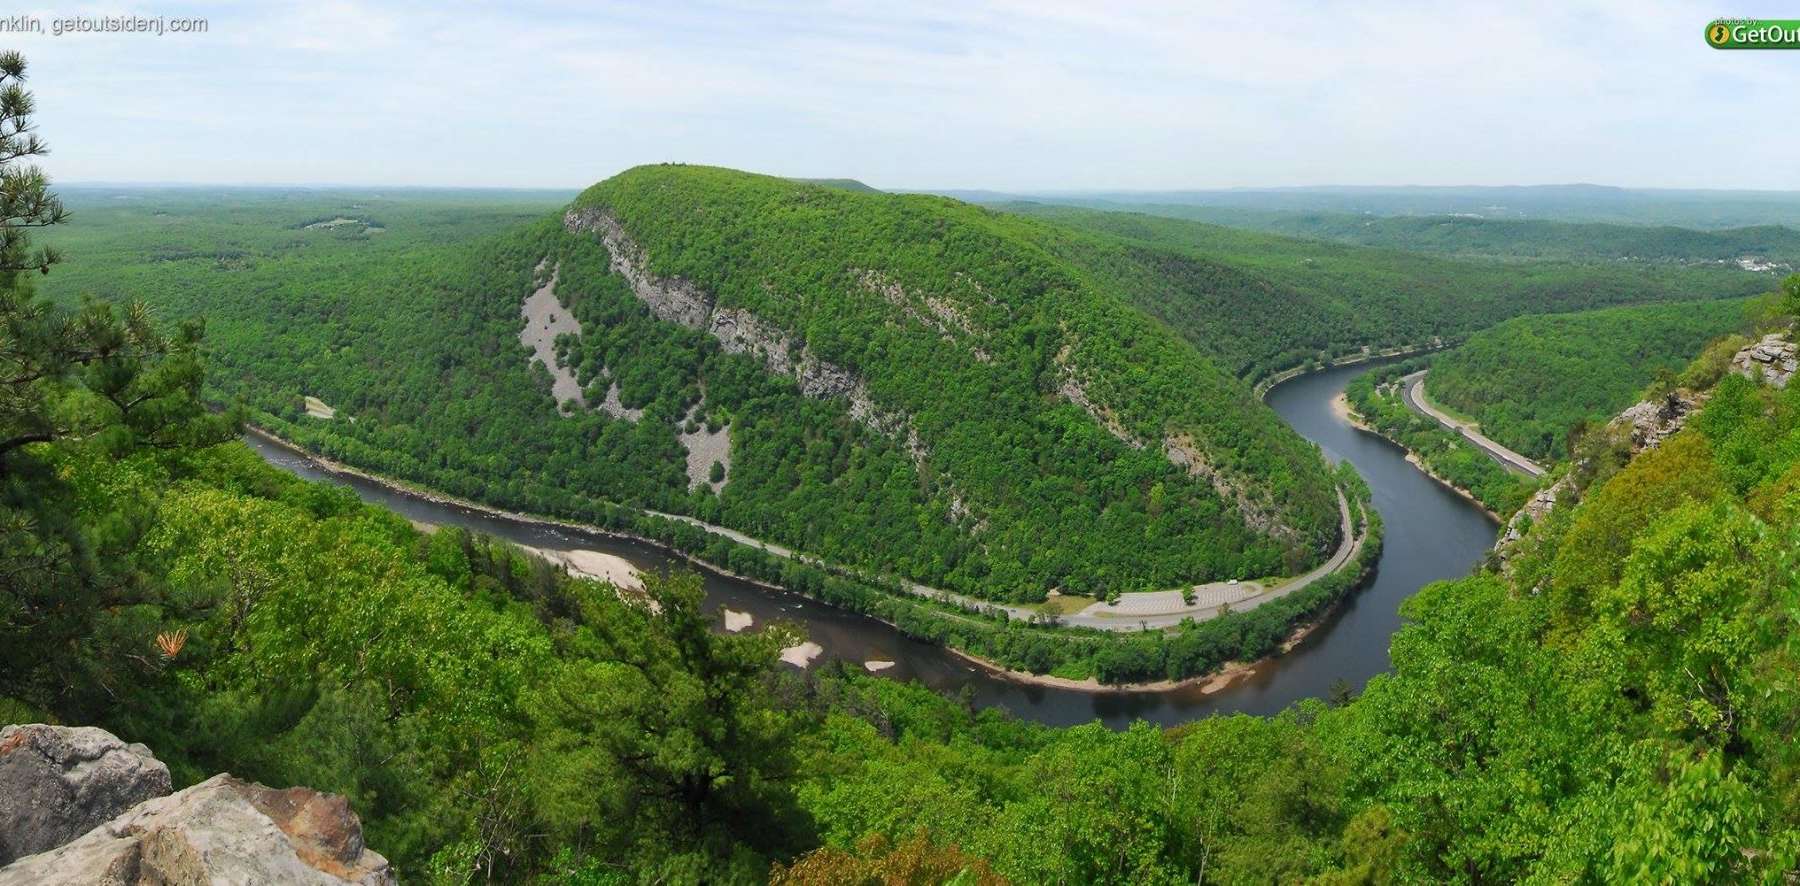 Delaware Water Gap National Recreation Area | Spread across NJ and PA